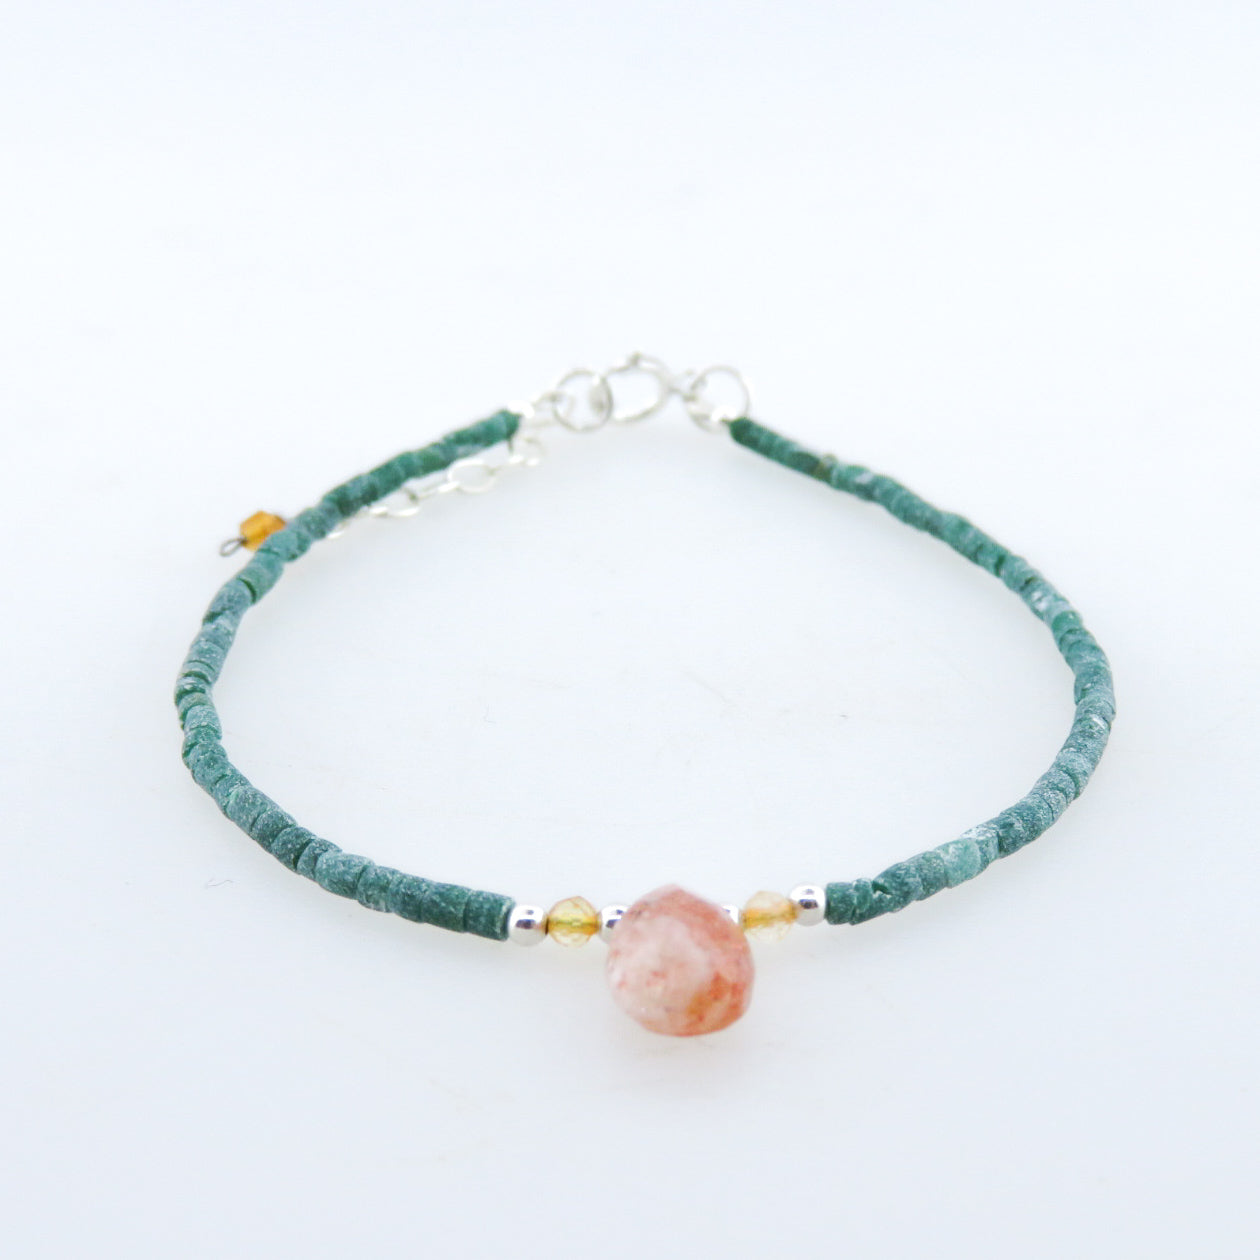 Emerald Bracelet with Sun Stone and Silver Beads